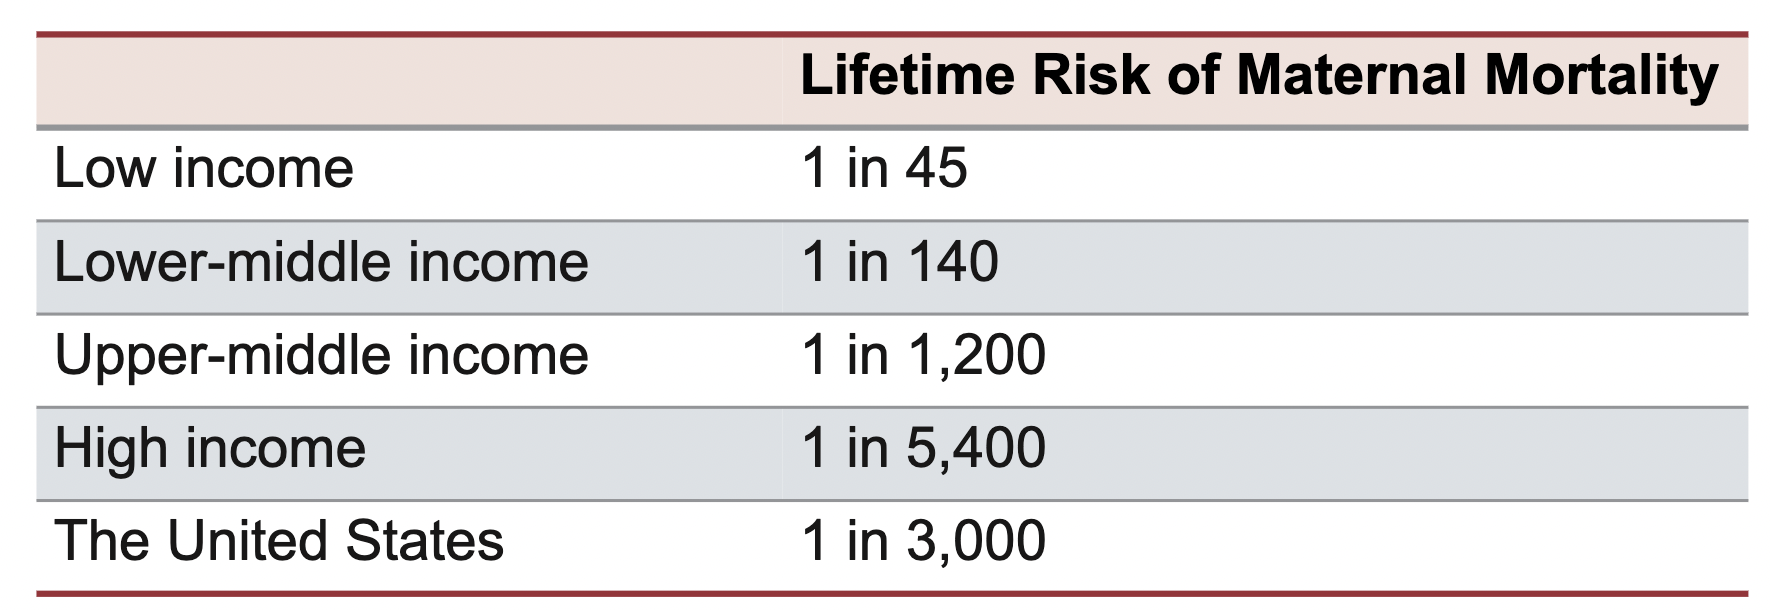 Lifetime risk of maternal morality by country wealth; via World Health Organization 2019b